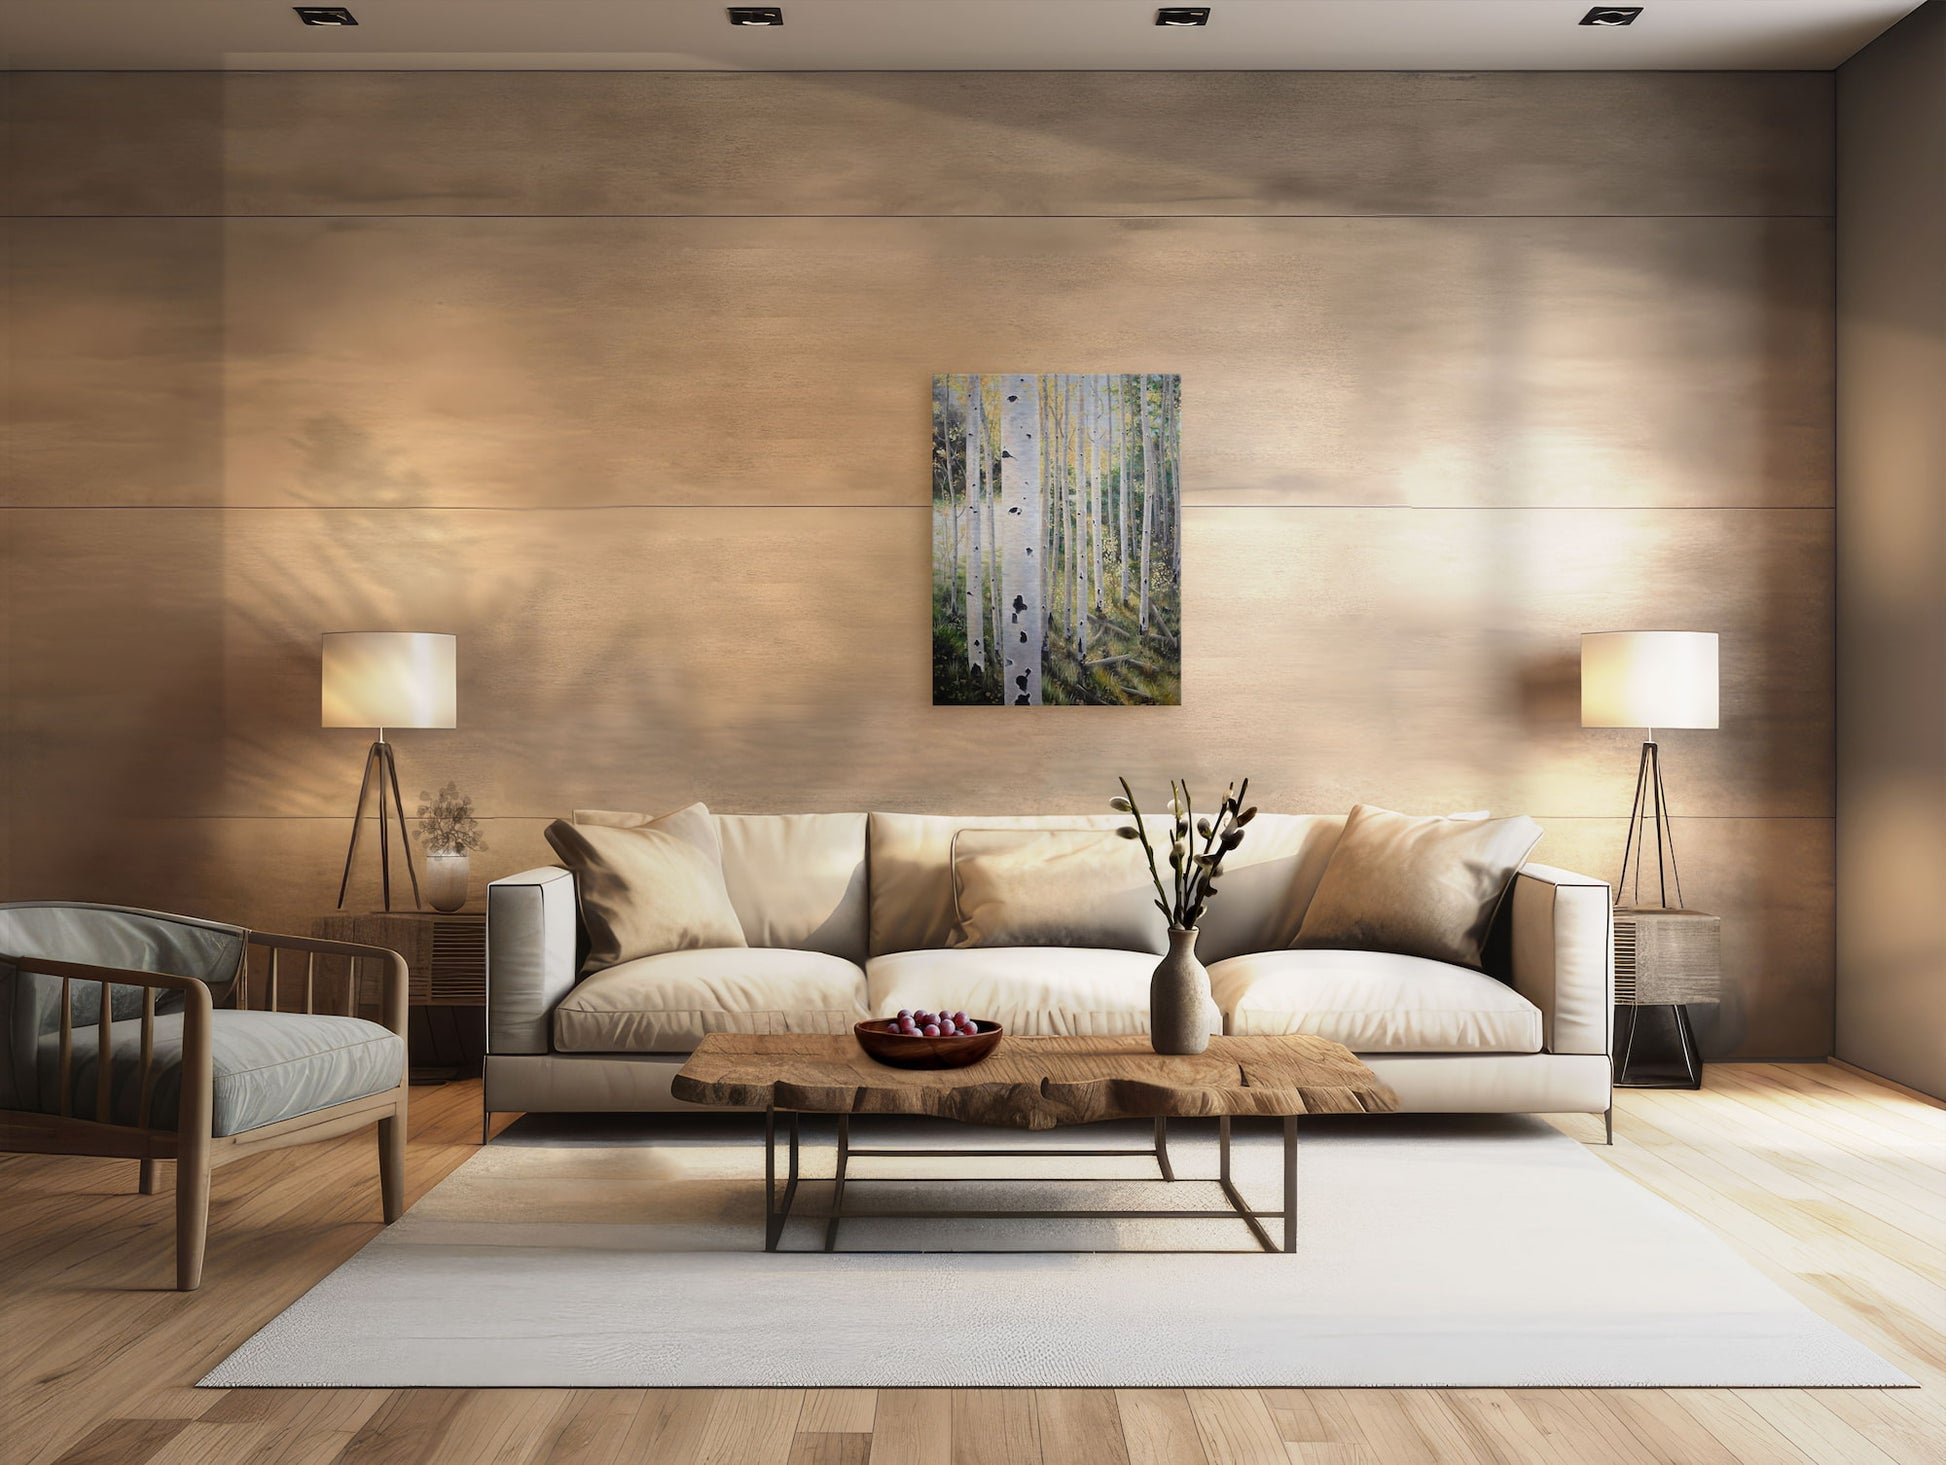 Oil Painting of Colorados Giants Aspen Trees by Jerry PoynterFineArt.com